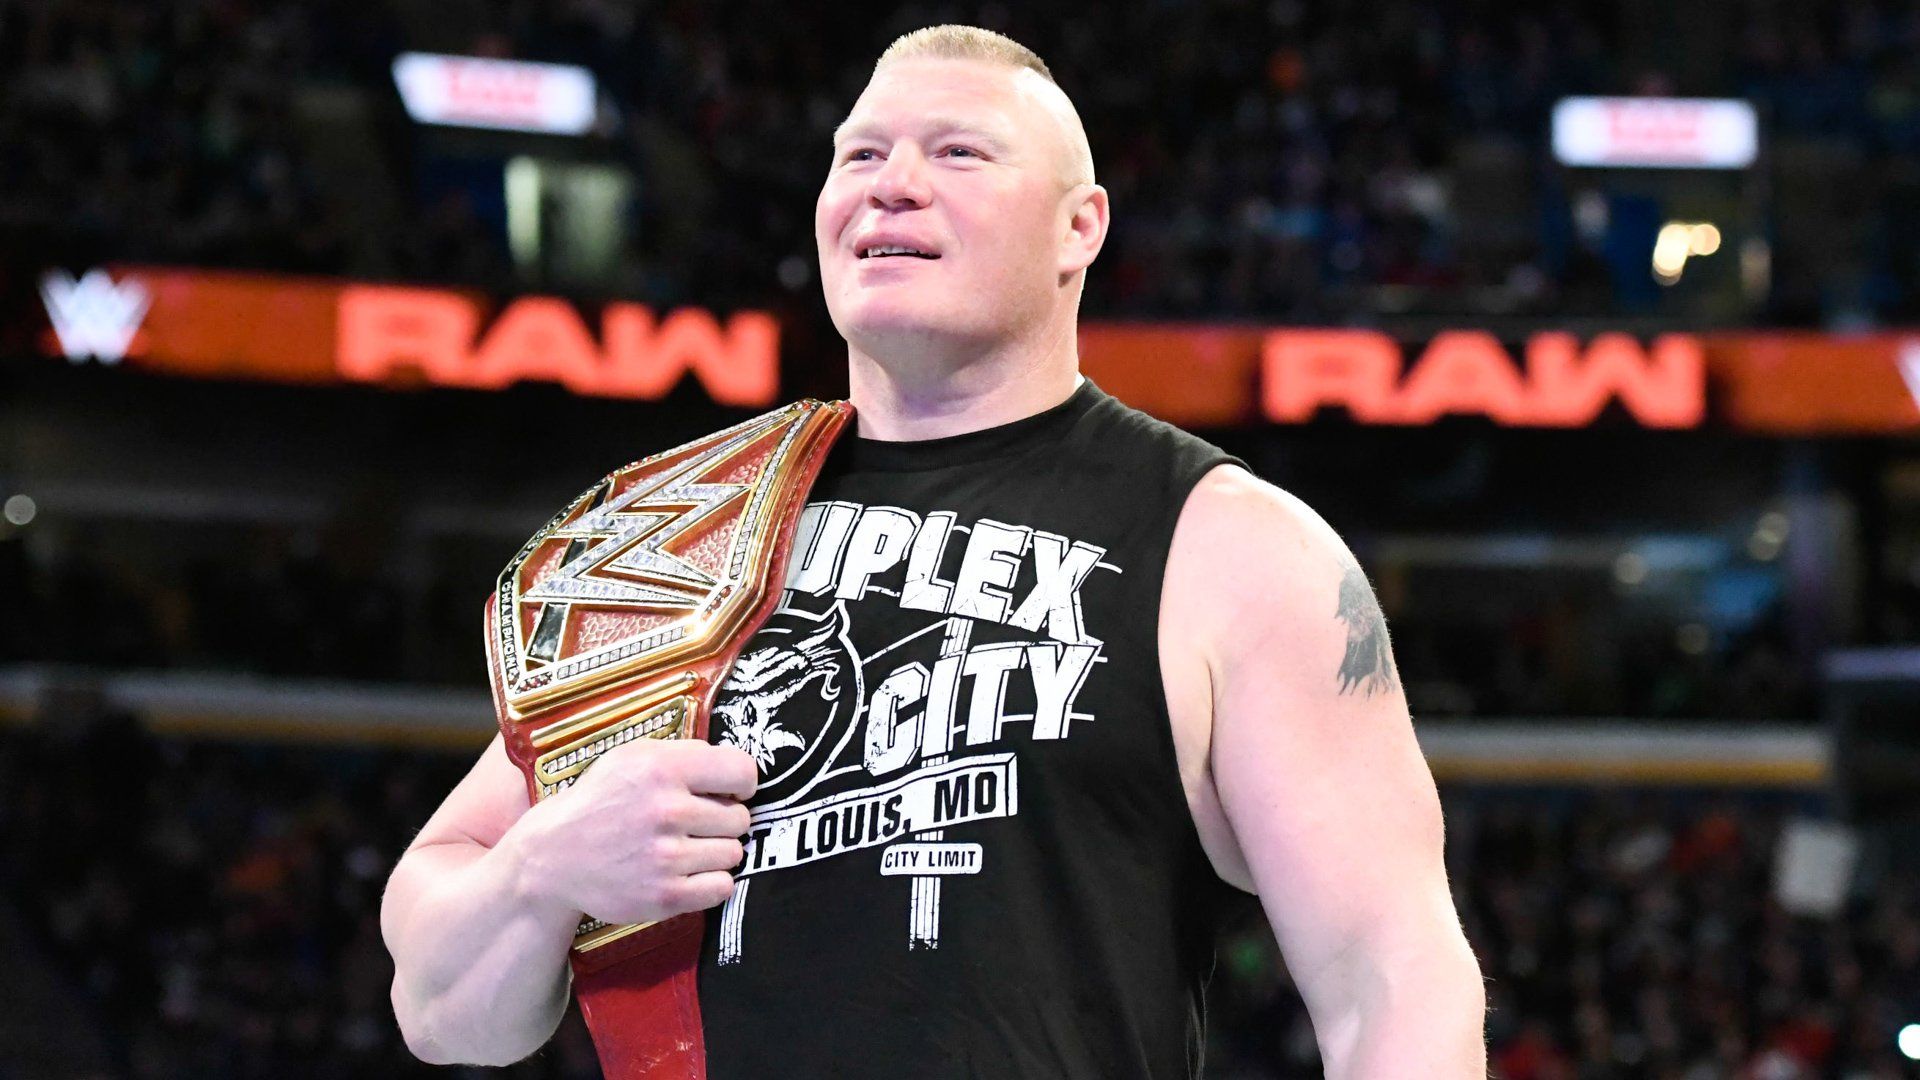 Brock-Lesnar-Universal-Champion-WWE-RAW-Greatest-Royal-Rumble-2018-Steel-Cage-Match